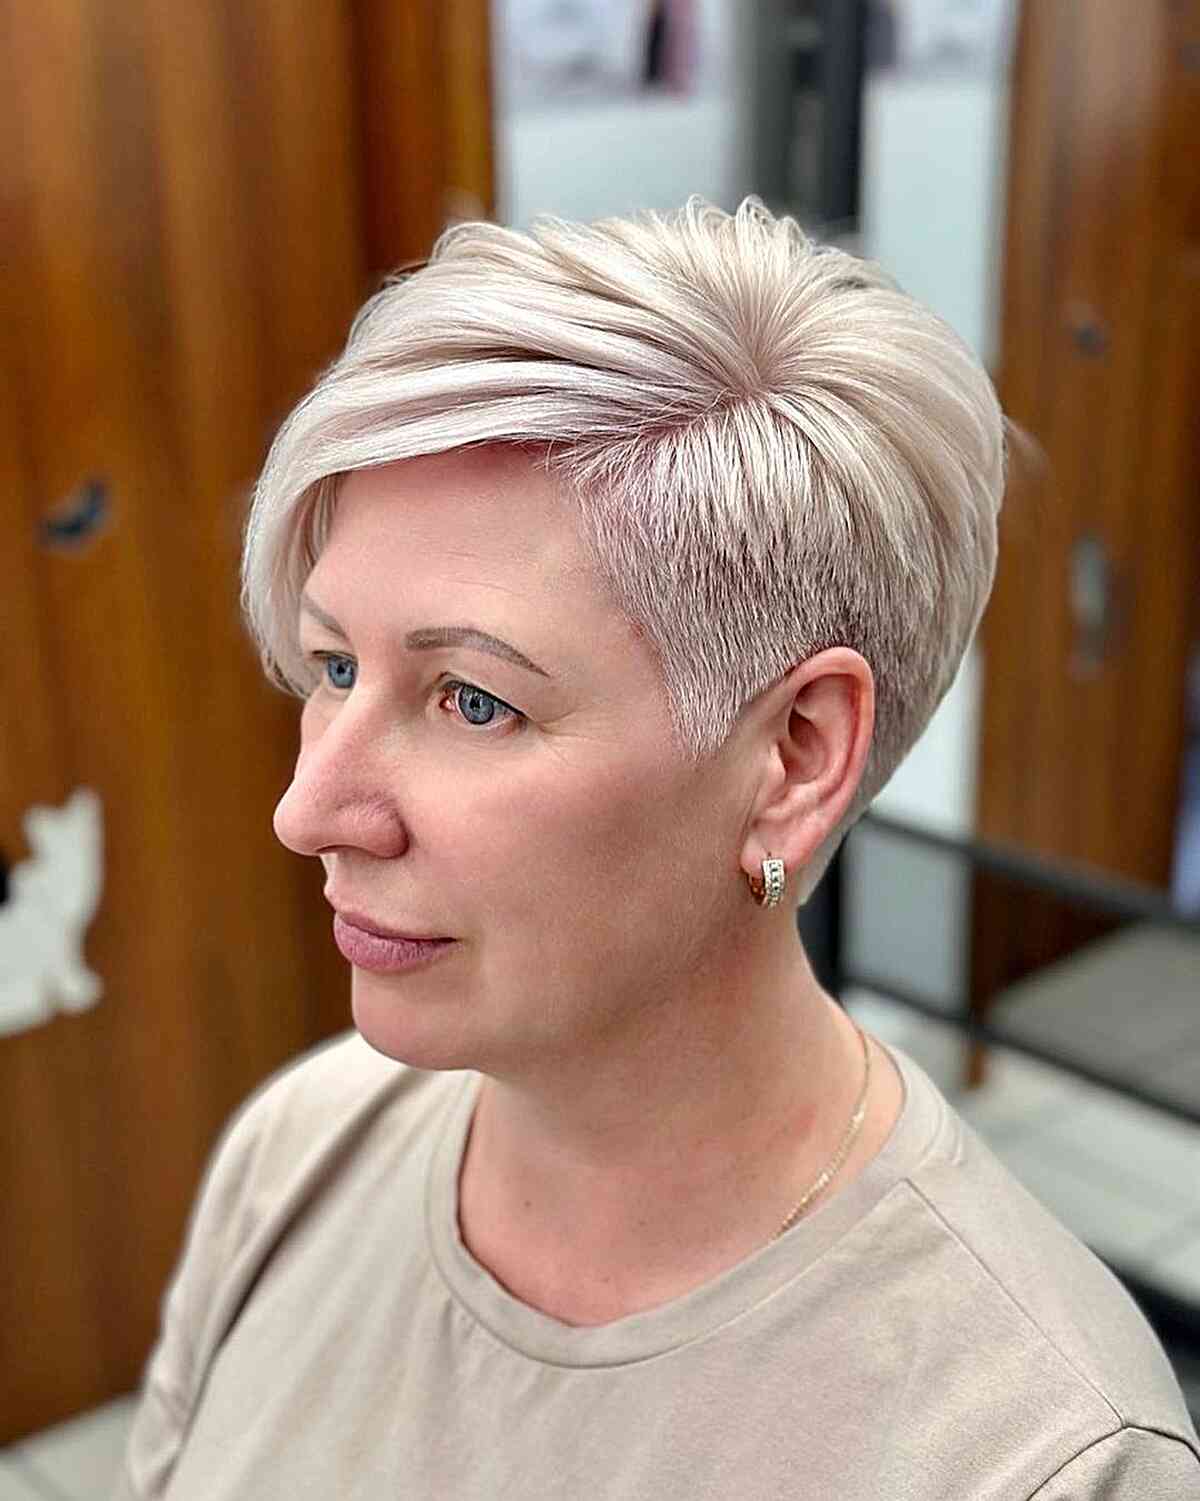 Tapered Side Part Long Pixie Hair for Older women 50s and up